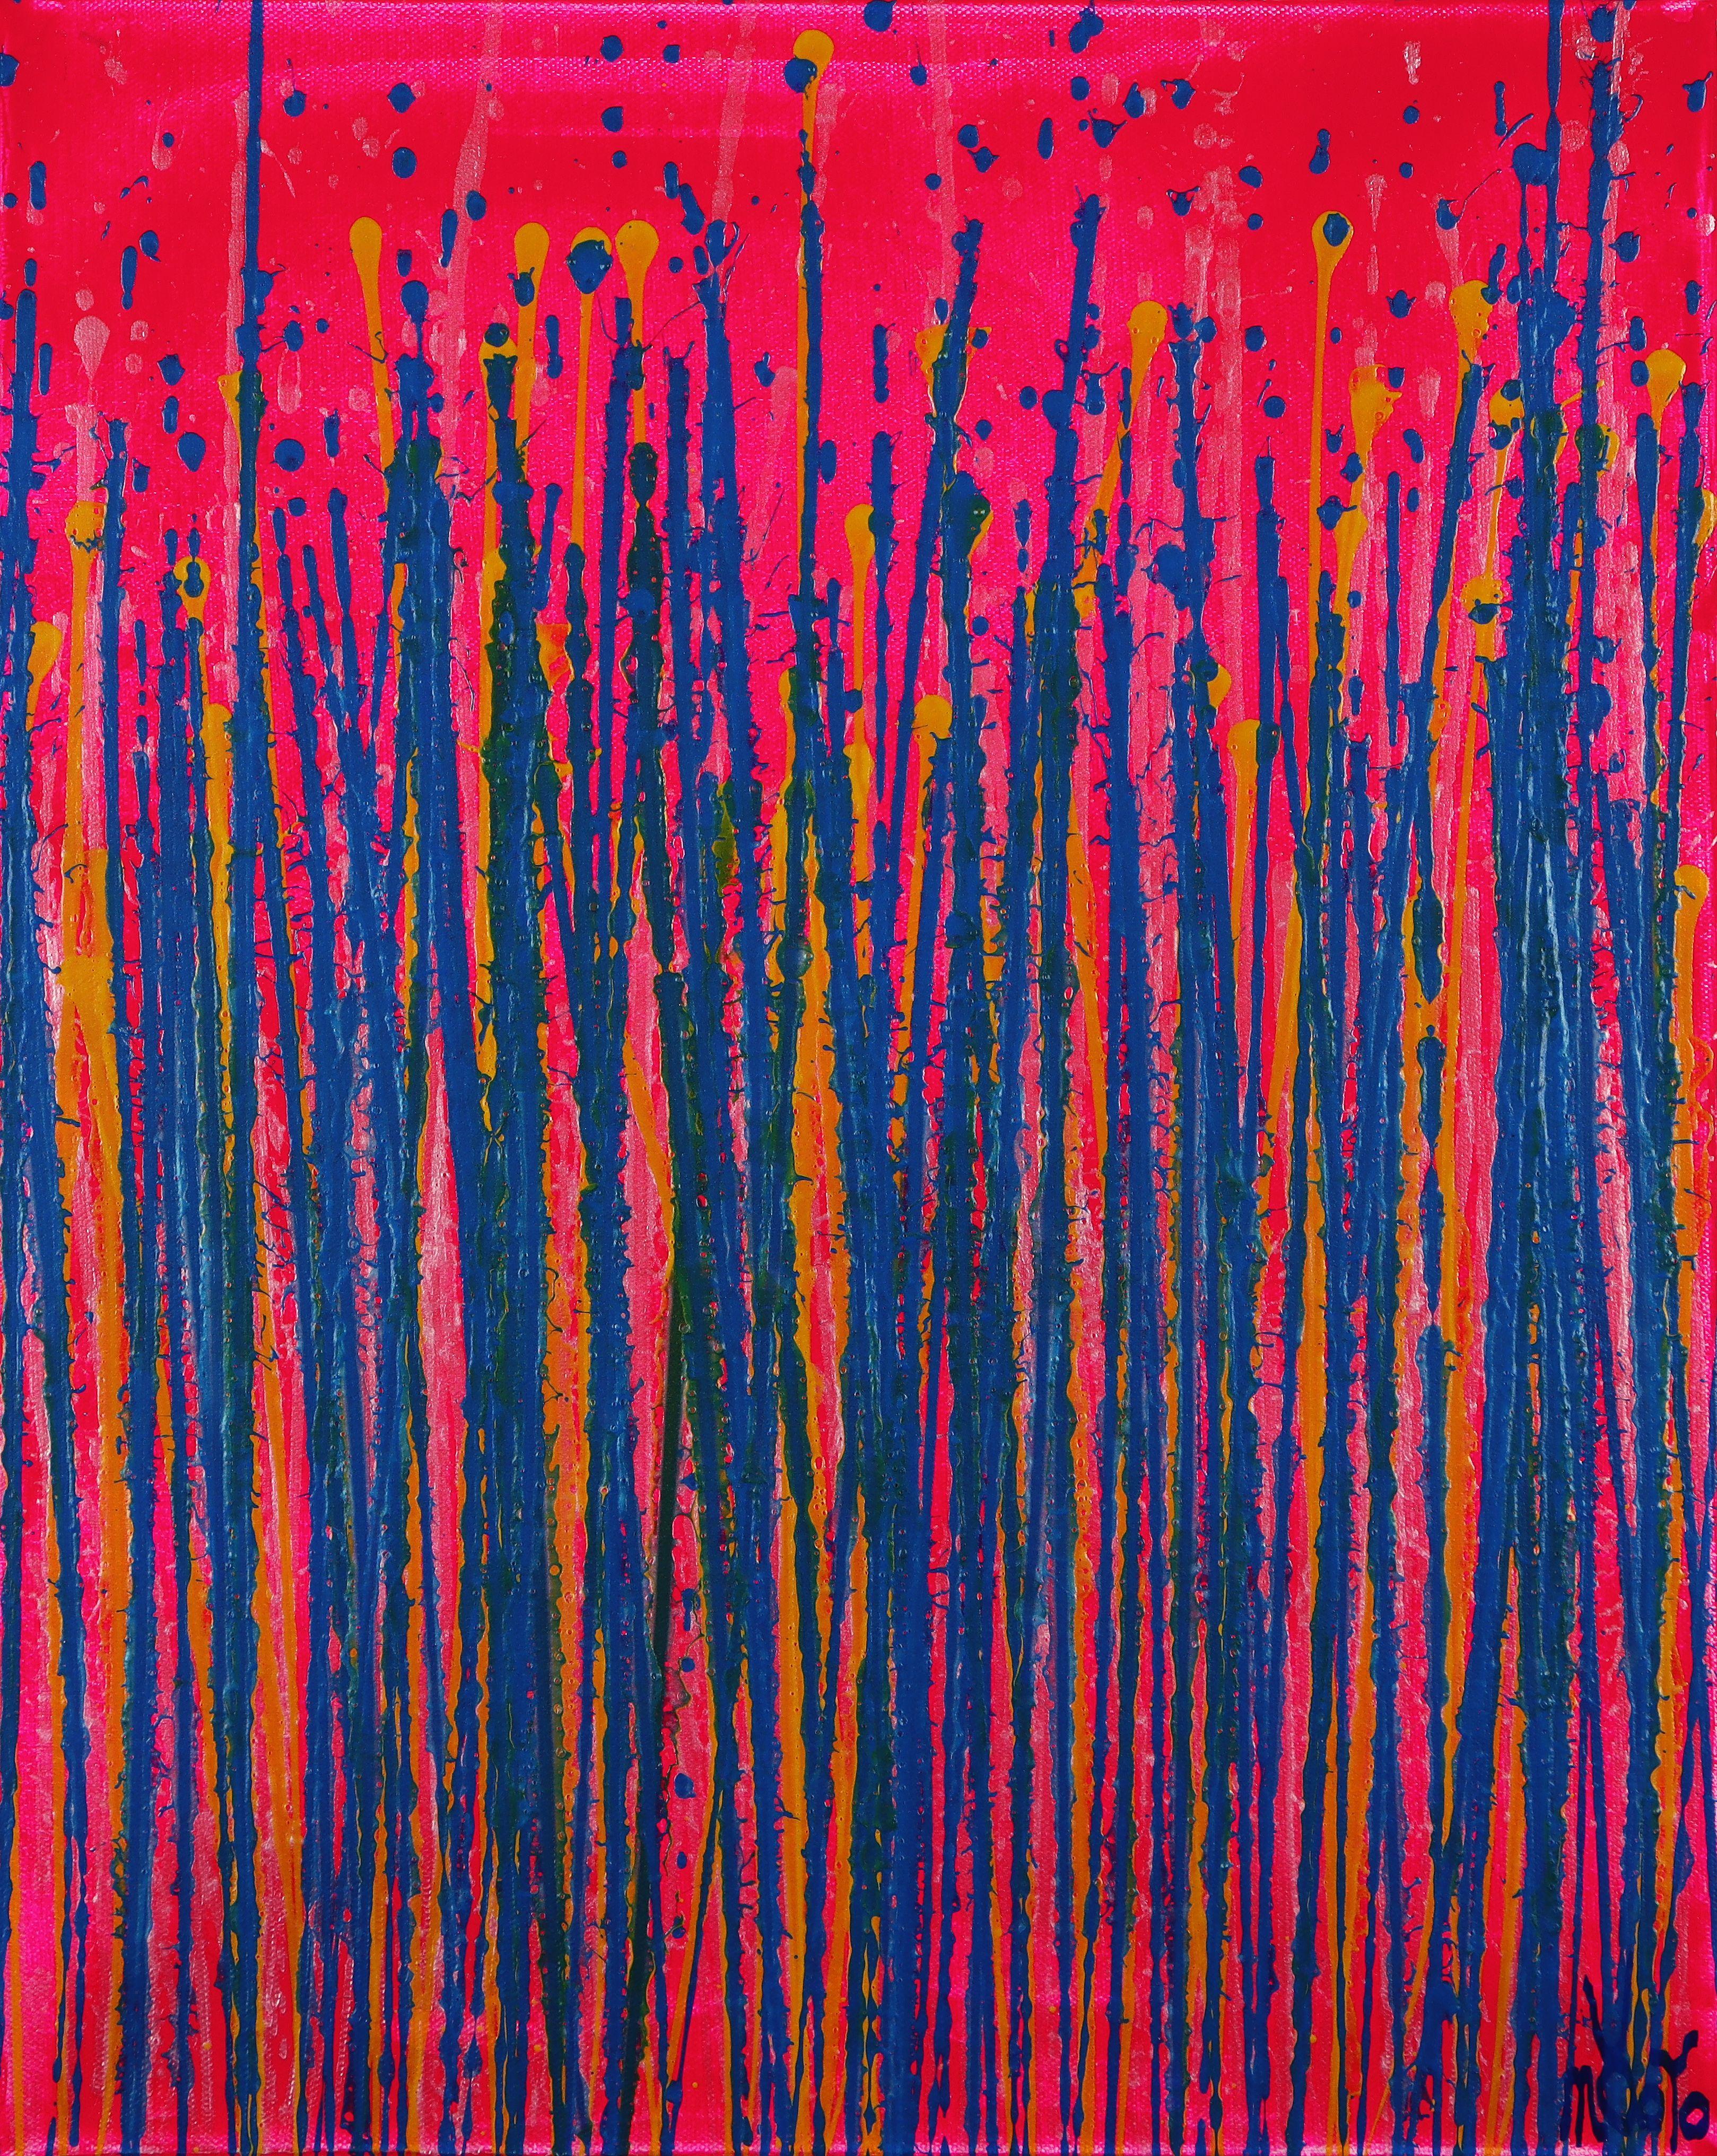 Drizzles expressions (over neon), Painting, Acrylic on Canvas - Red Abstract Painting by Nestor Toro